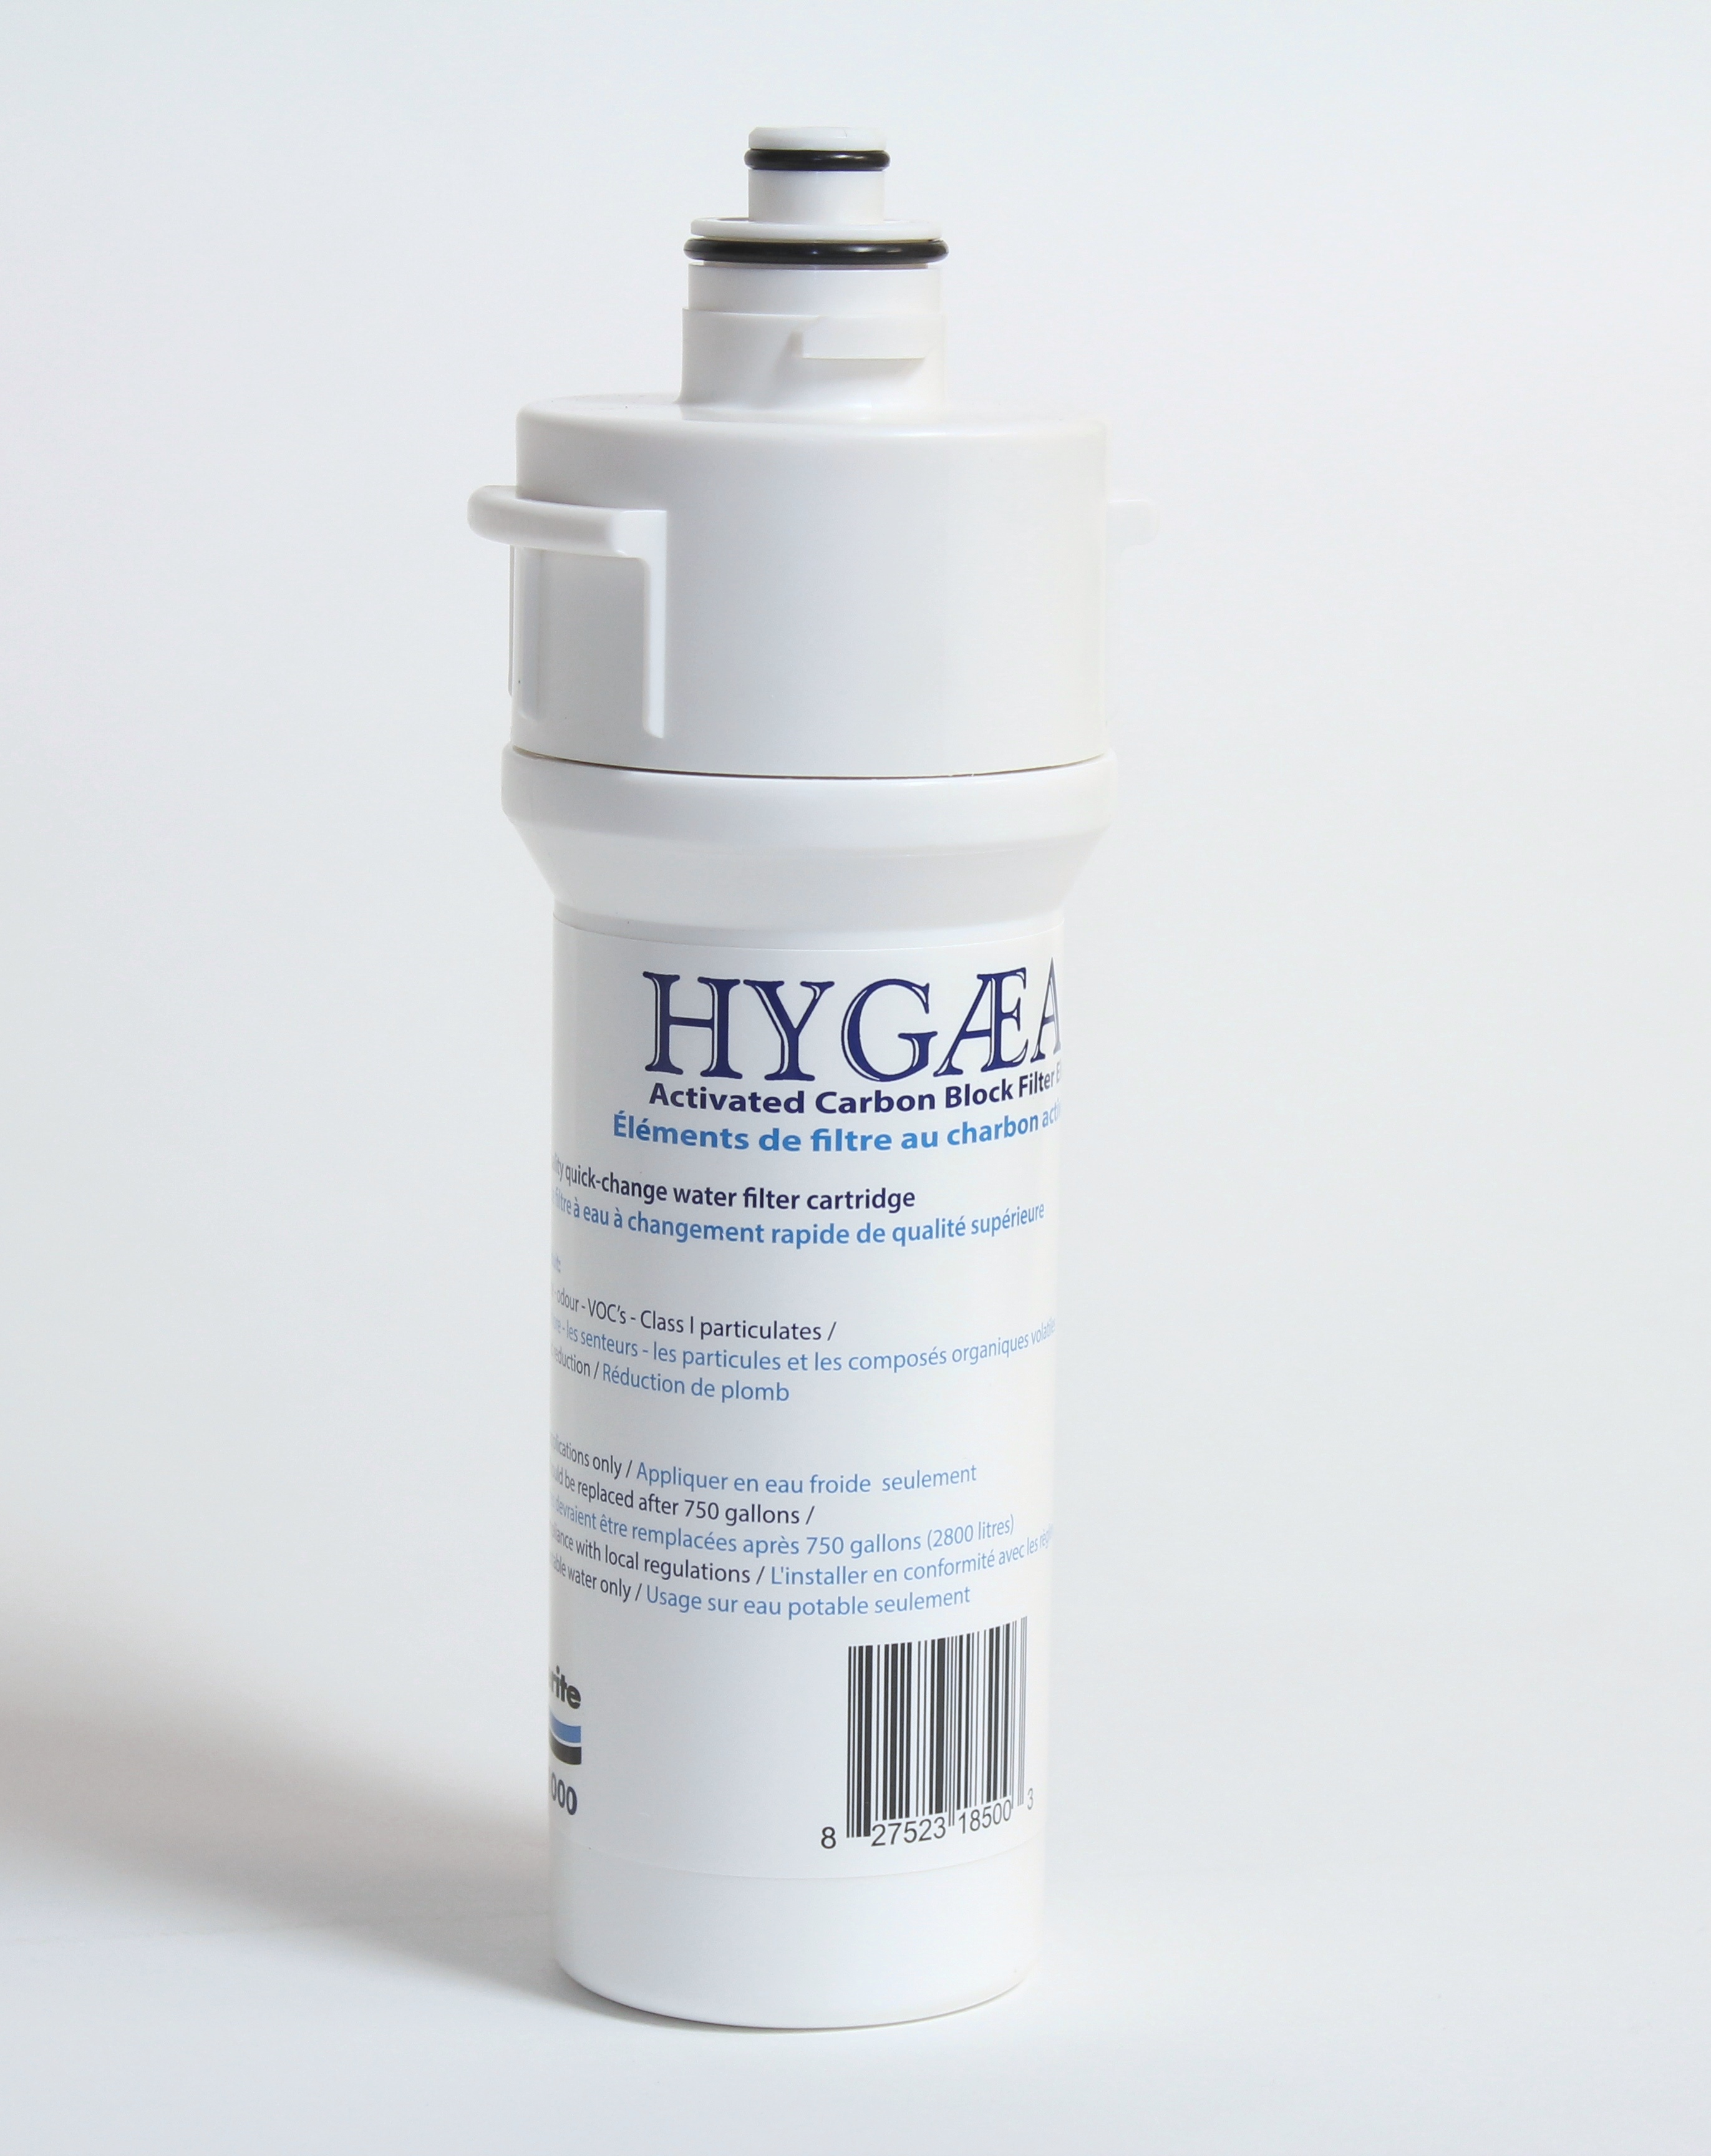 Featured image for “Hygaea Carbon Block, 0.5 Micron, Quick-Change Filter”